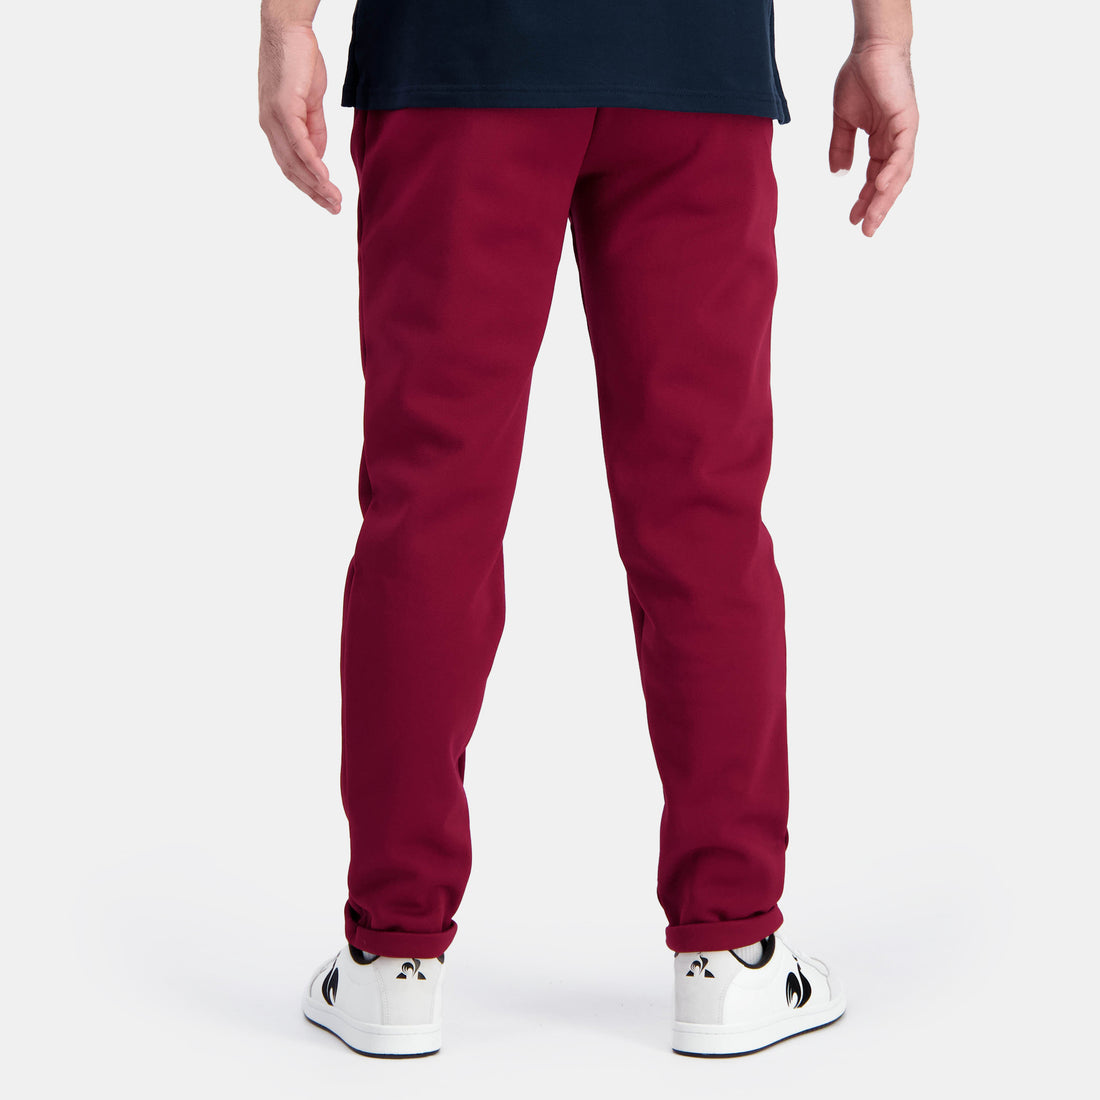 2410766-ESS T/T Pant Carotte N°2 M rambo red  | Hose coupe carotte für Herren